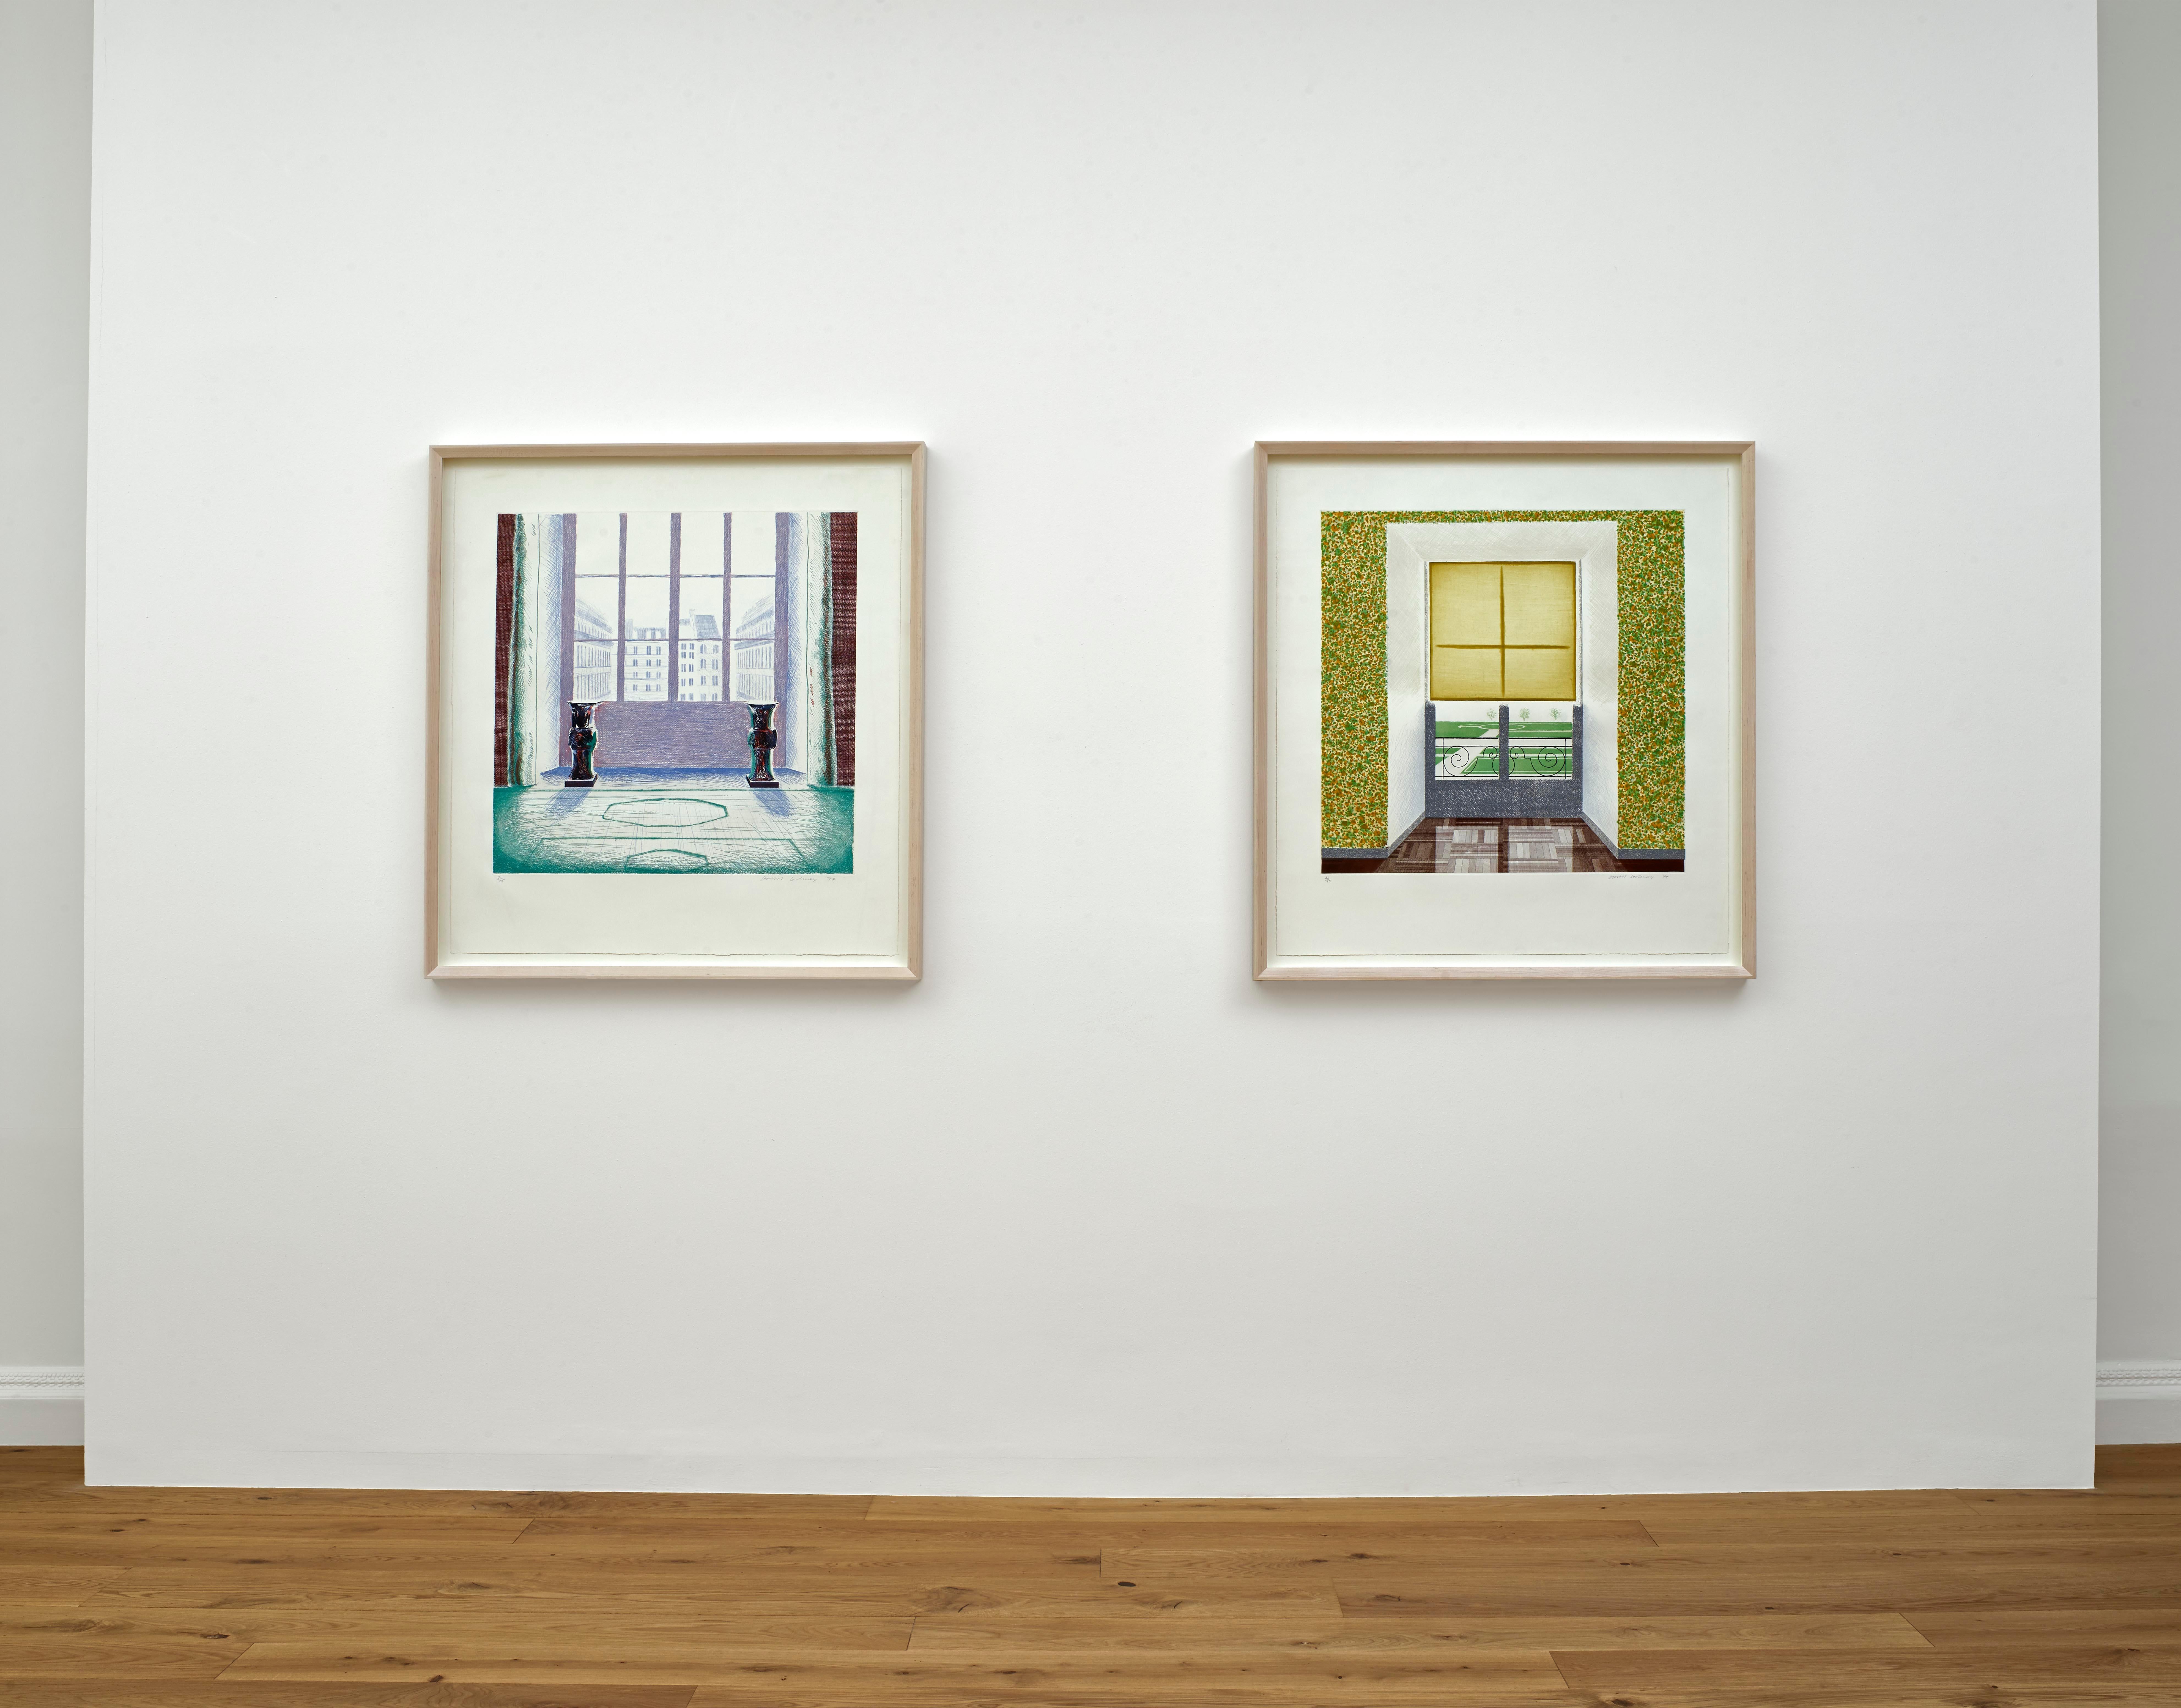 David Hockney Figurative Print - "Two vases in the Louvre" AND "Contrejour in the French Style" pair of etchings